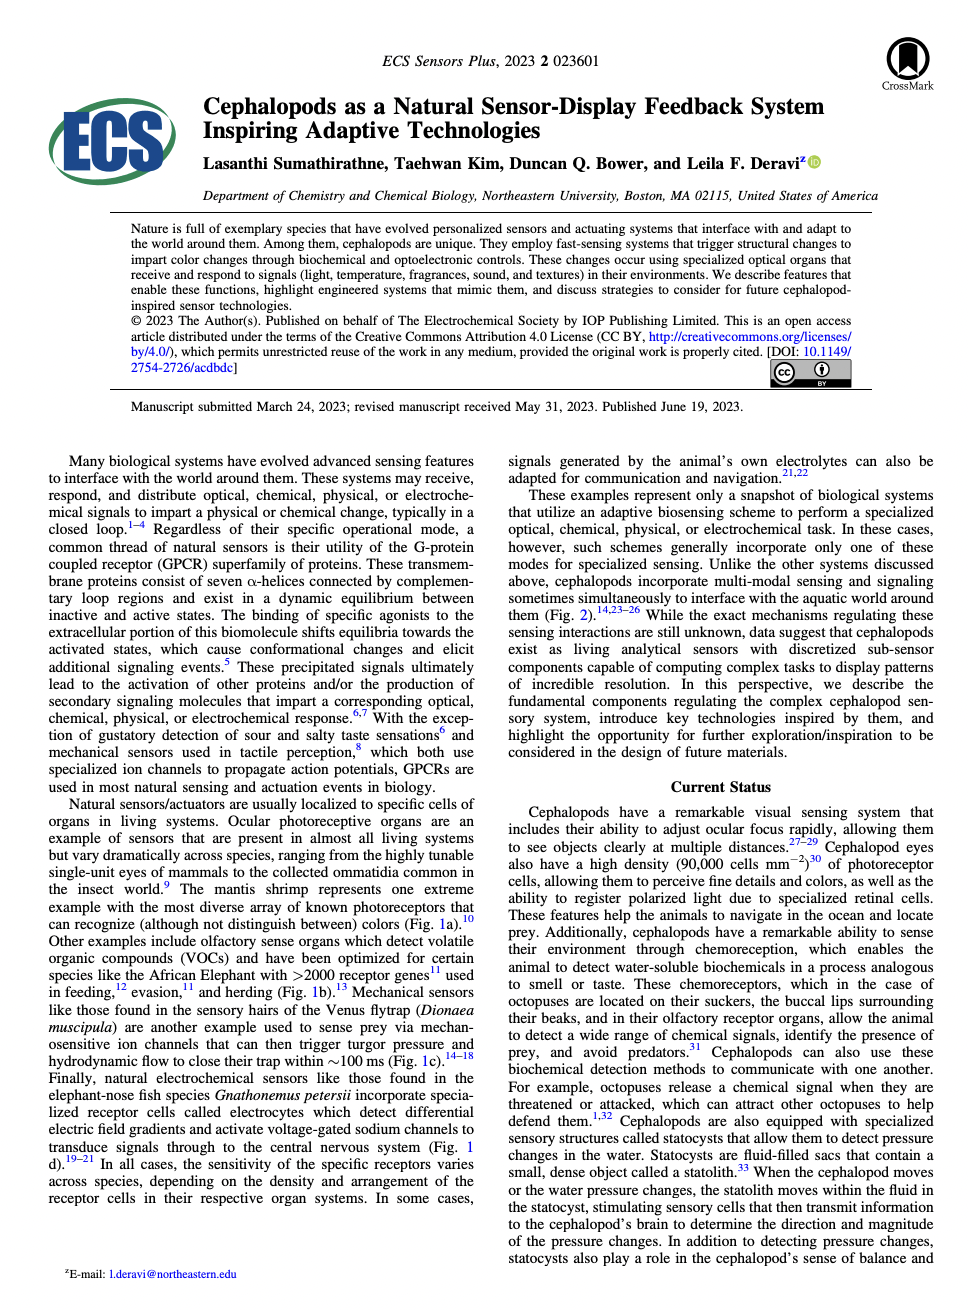 image of article